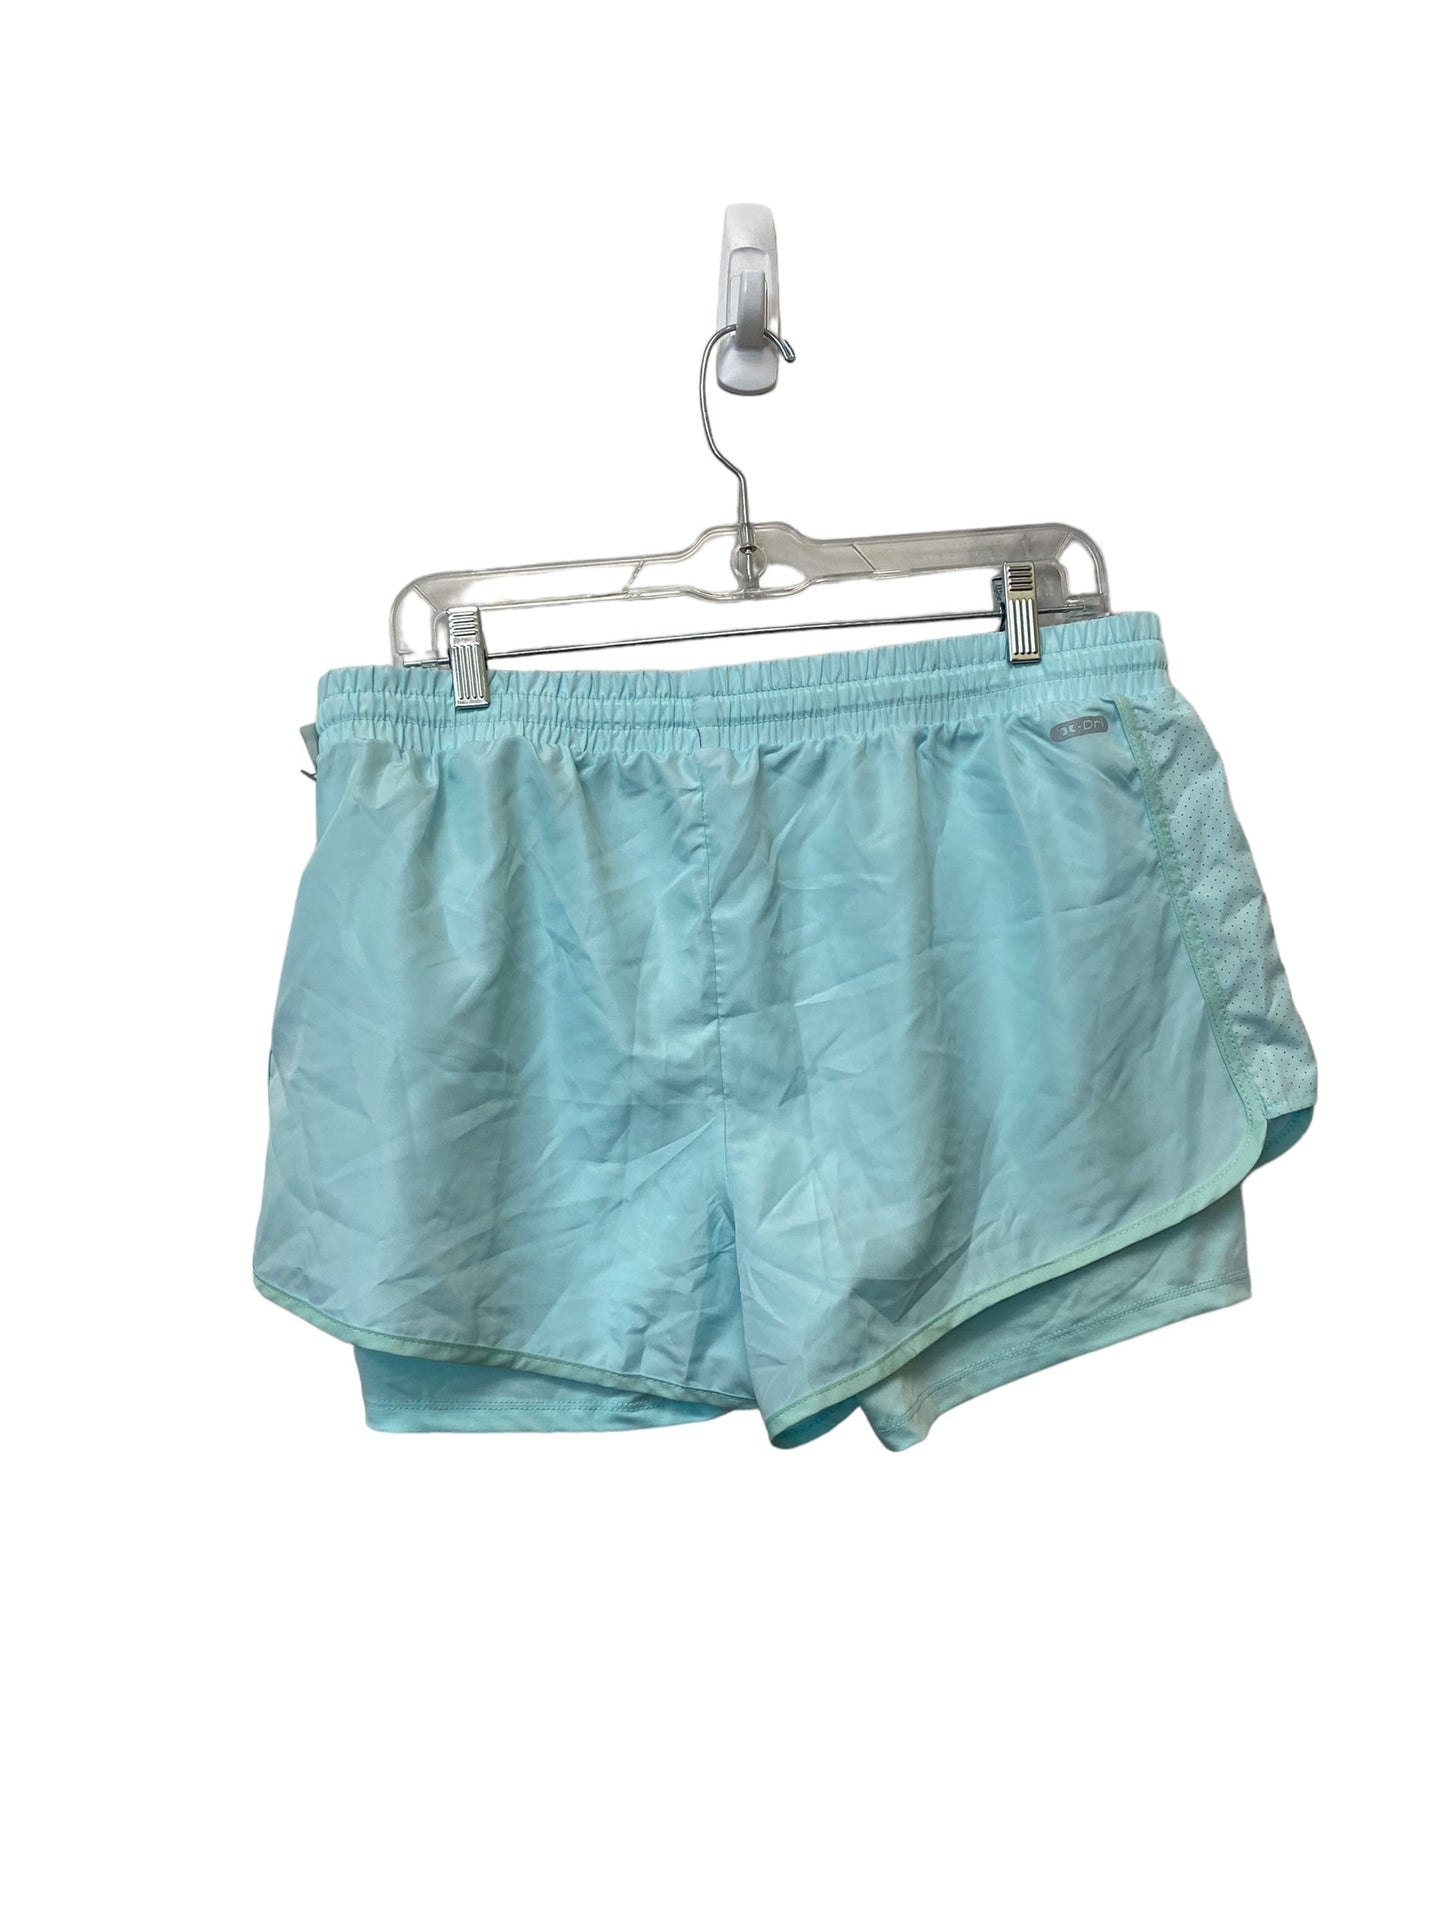 Teal Athletic Shorts Rbx, Size L